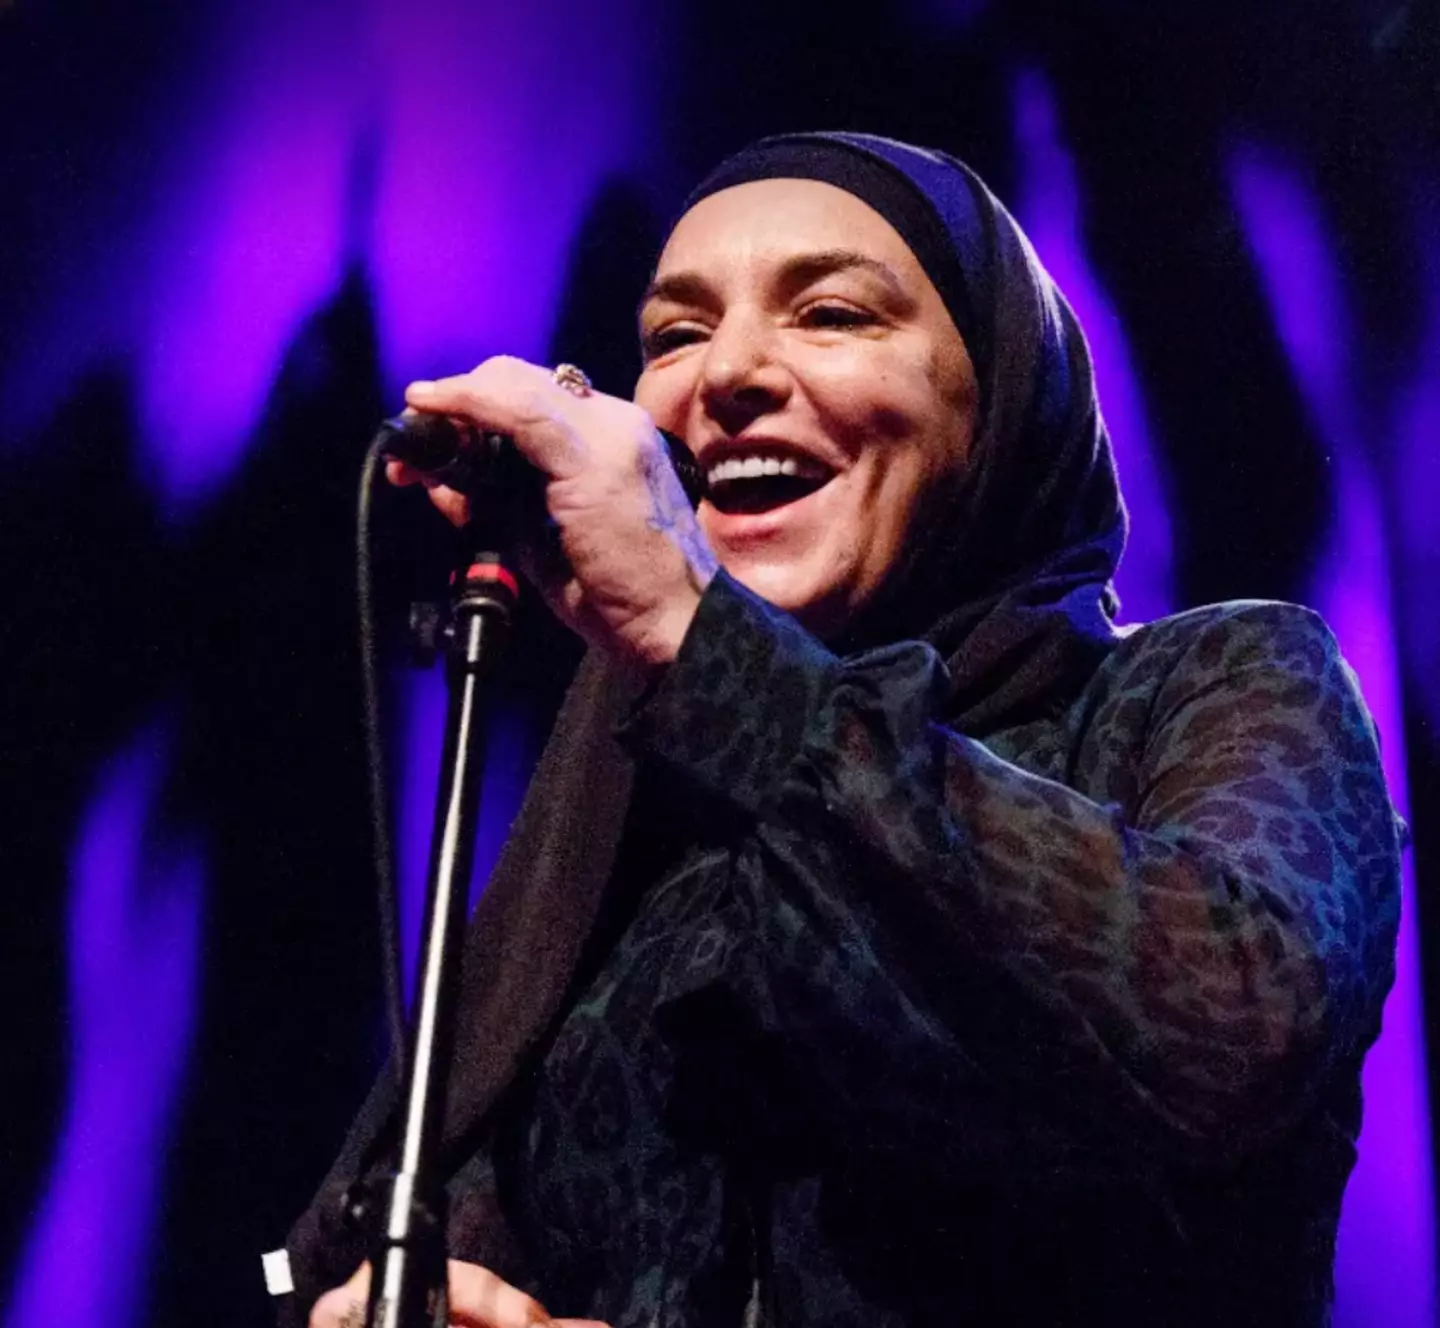 Sinead O'Connor was 56 when she died.